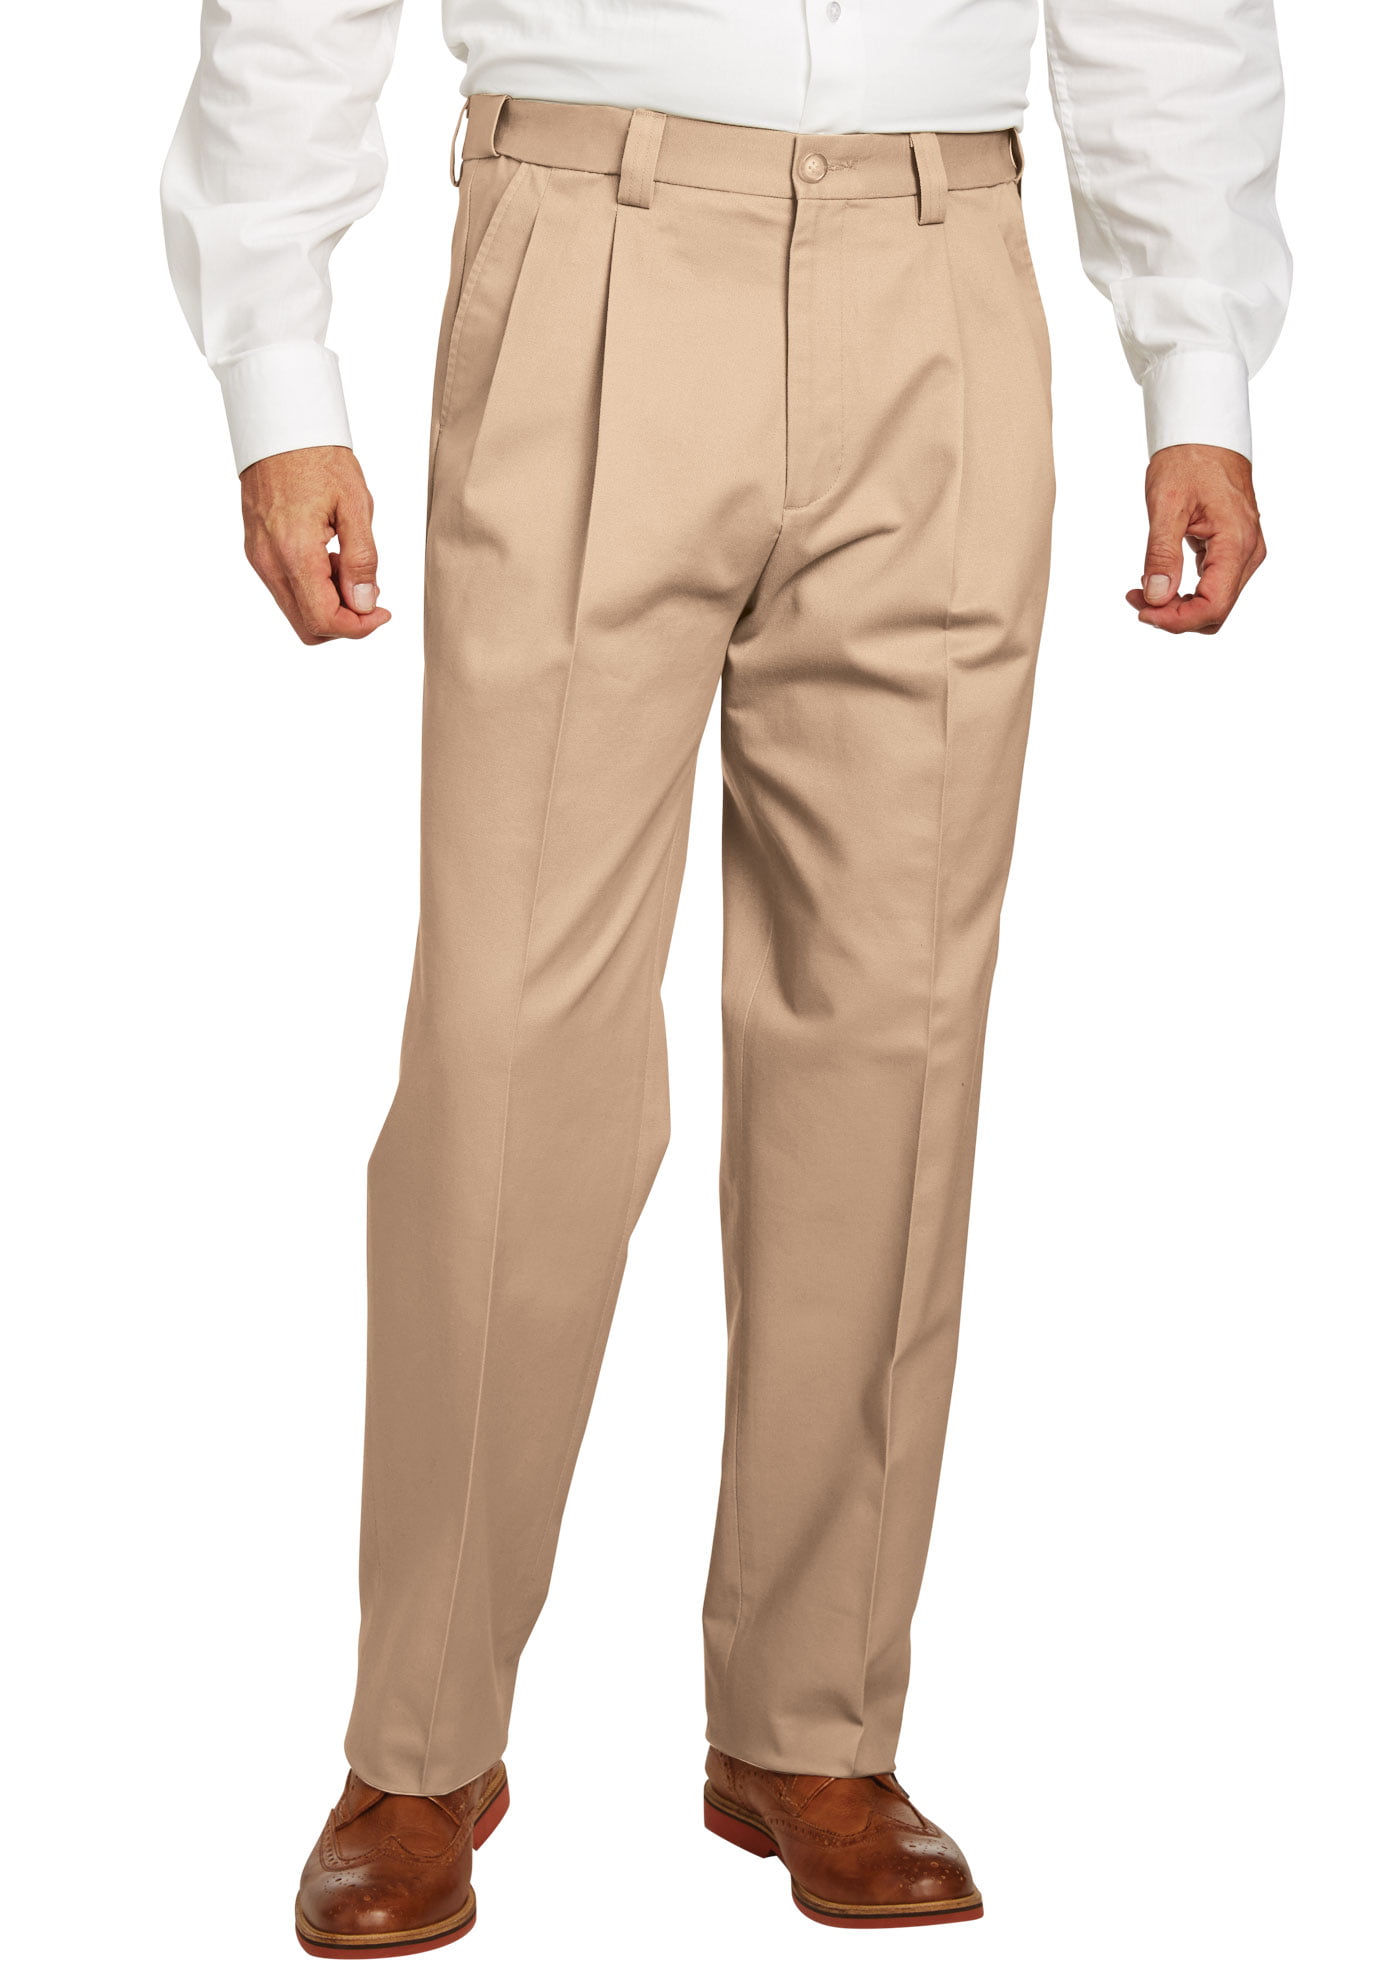 KingSize Mens Big /& Tall Relaxed Fit Wrinkle-Free Expandable Waist Plain Front Pants